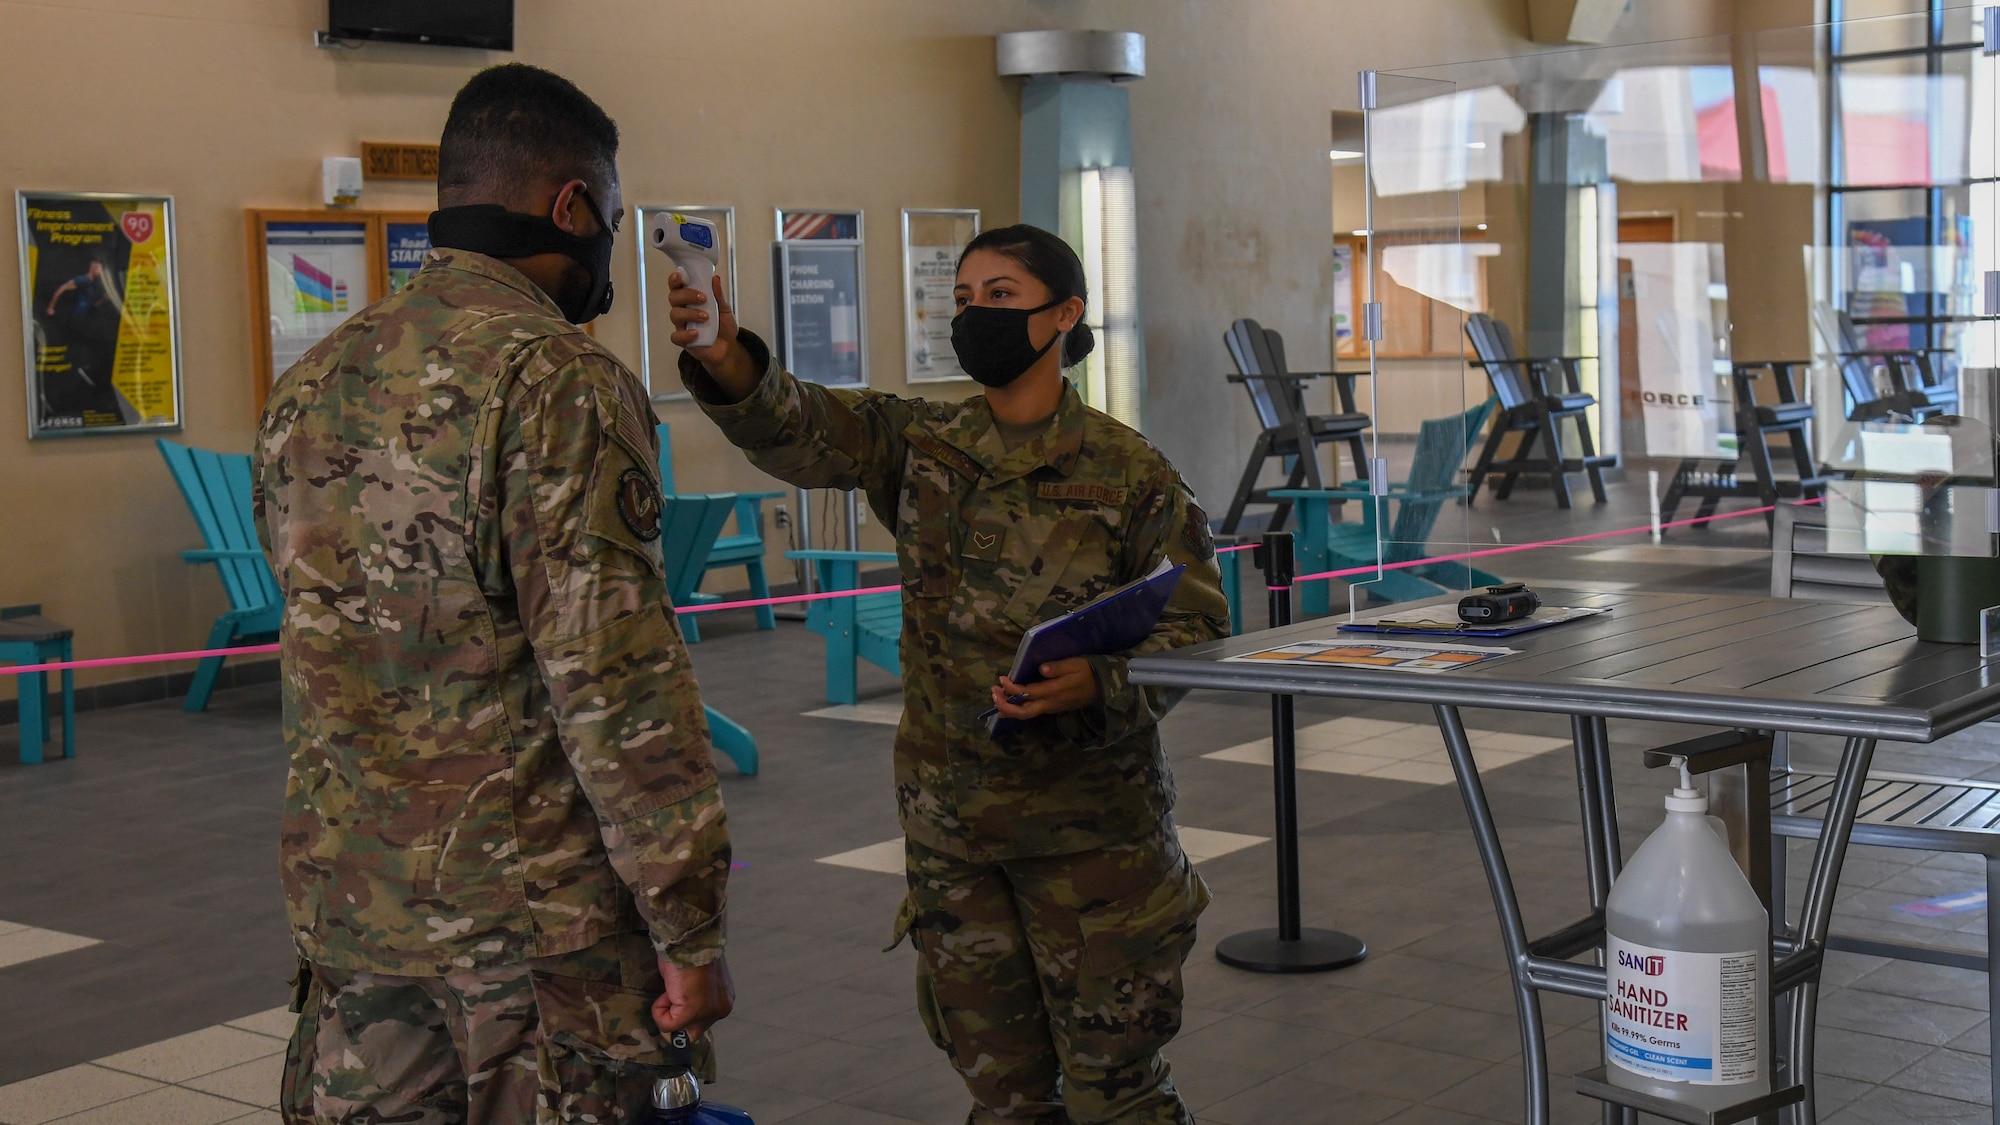 U.S. Air Force Senior Airman Esmeralda Morales, a 6th Force Support Squadron (FSS) fitness center specialist conducts a temperature check for Staff Sgt. Johari Stephens with the 6th FSS, as he enters the Short Fitness Center Sept. 2, 2020, at MacDill Air Force Base, Fla.